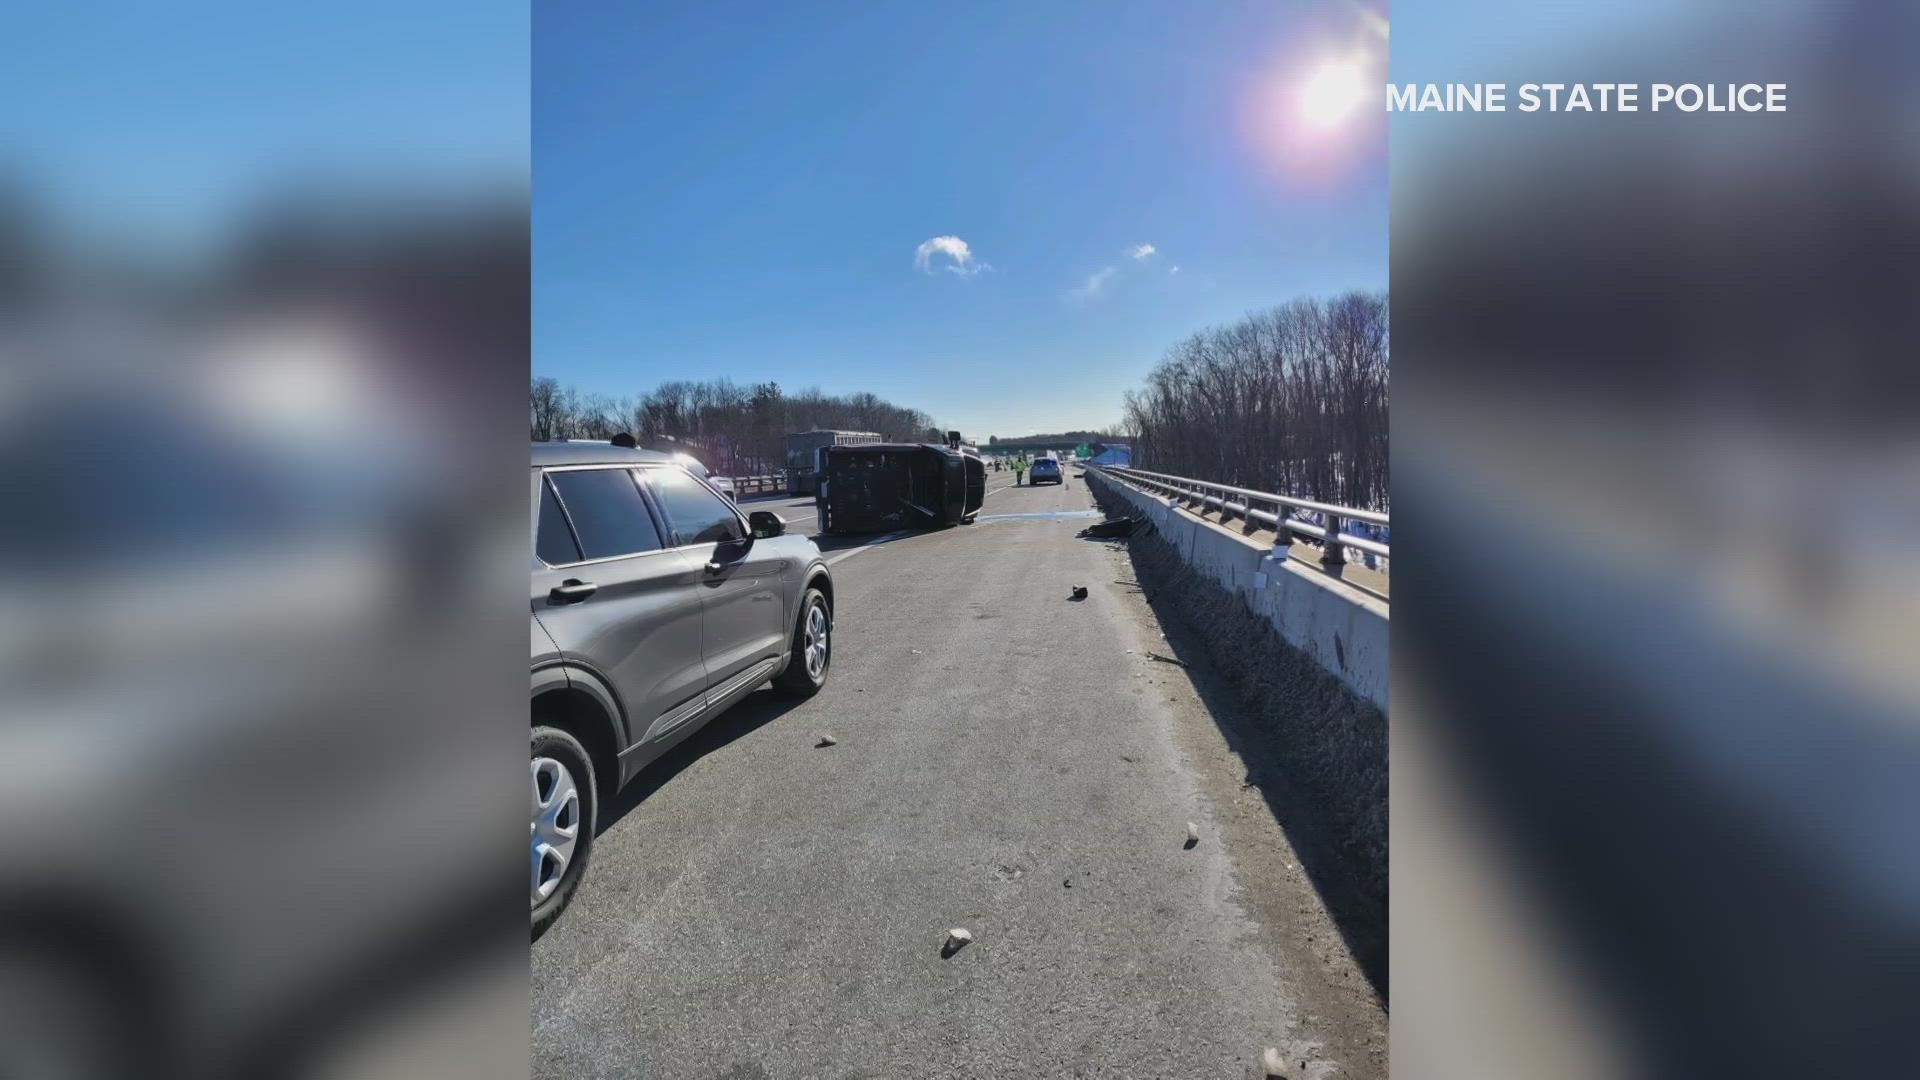 Maine State Police said 21-year-old Nathan Kennedy was driving a pickup truck on Friday, Feb. 3 when it hit a guardrail on the Saco River bridge.